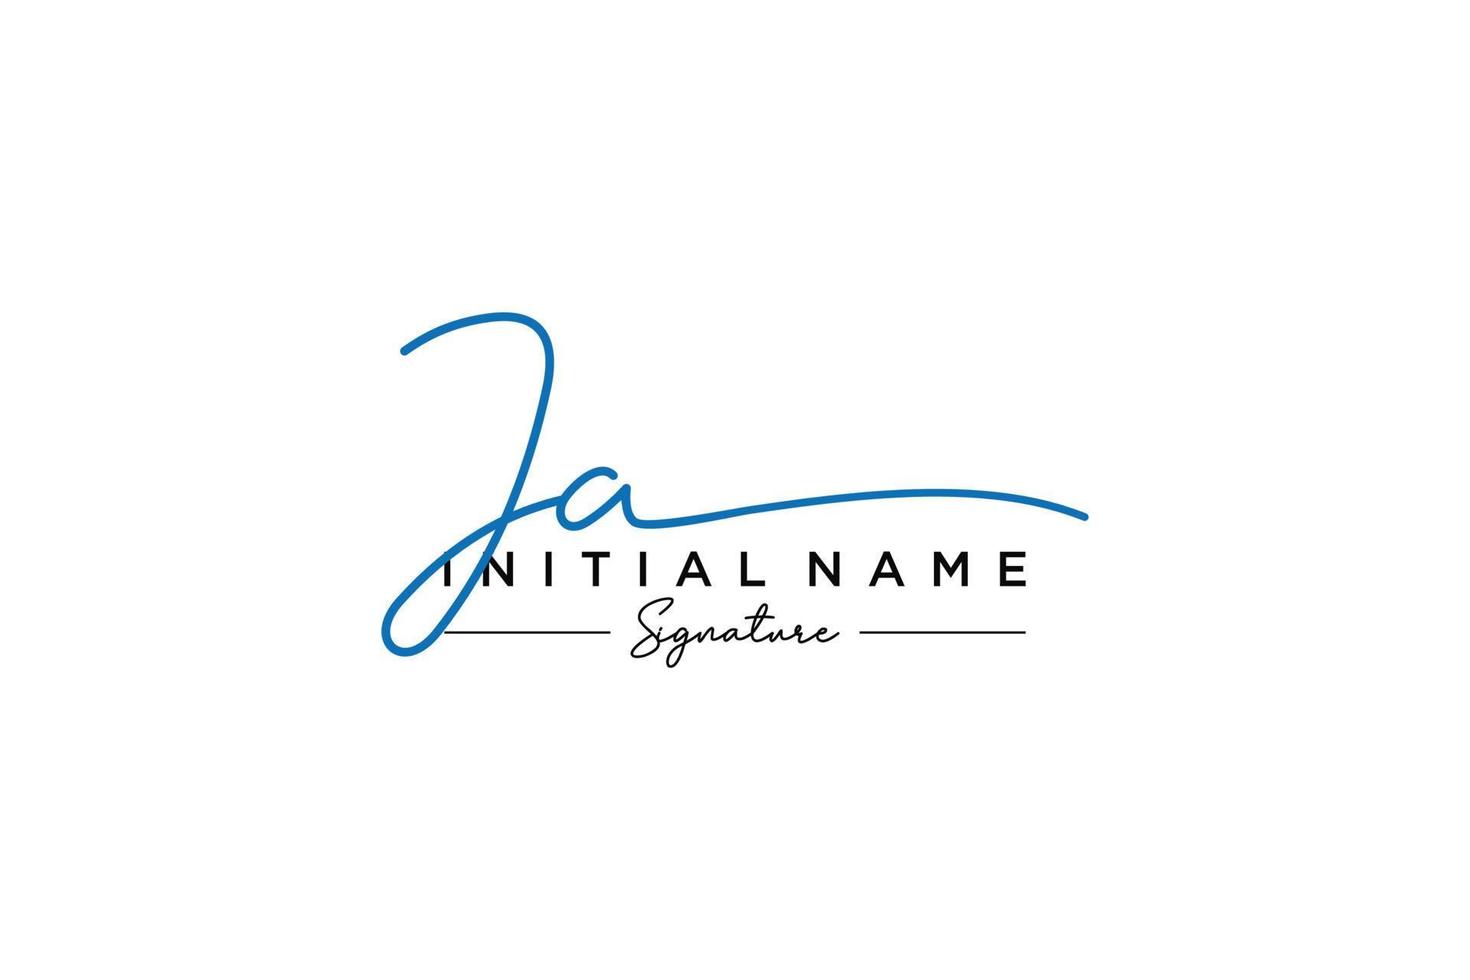 Initial JA signature logo template vector. Hand drawn Calligraphy lettering Vector illustration.